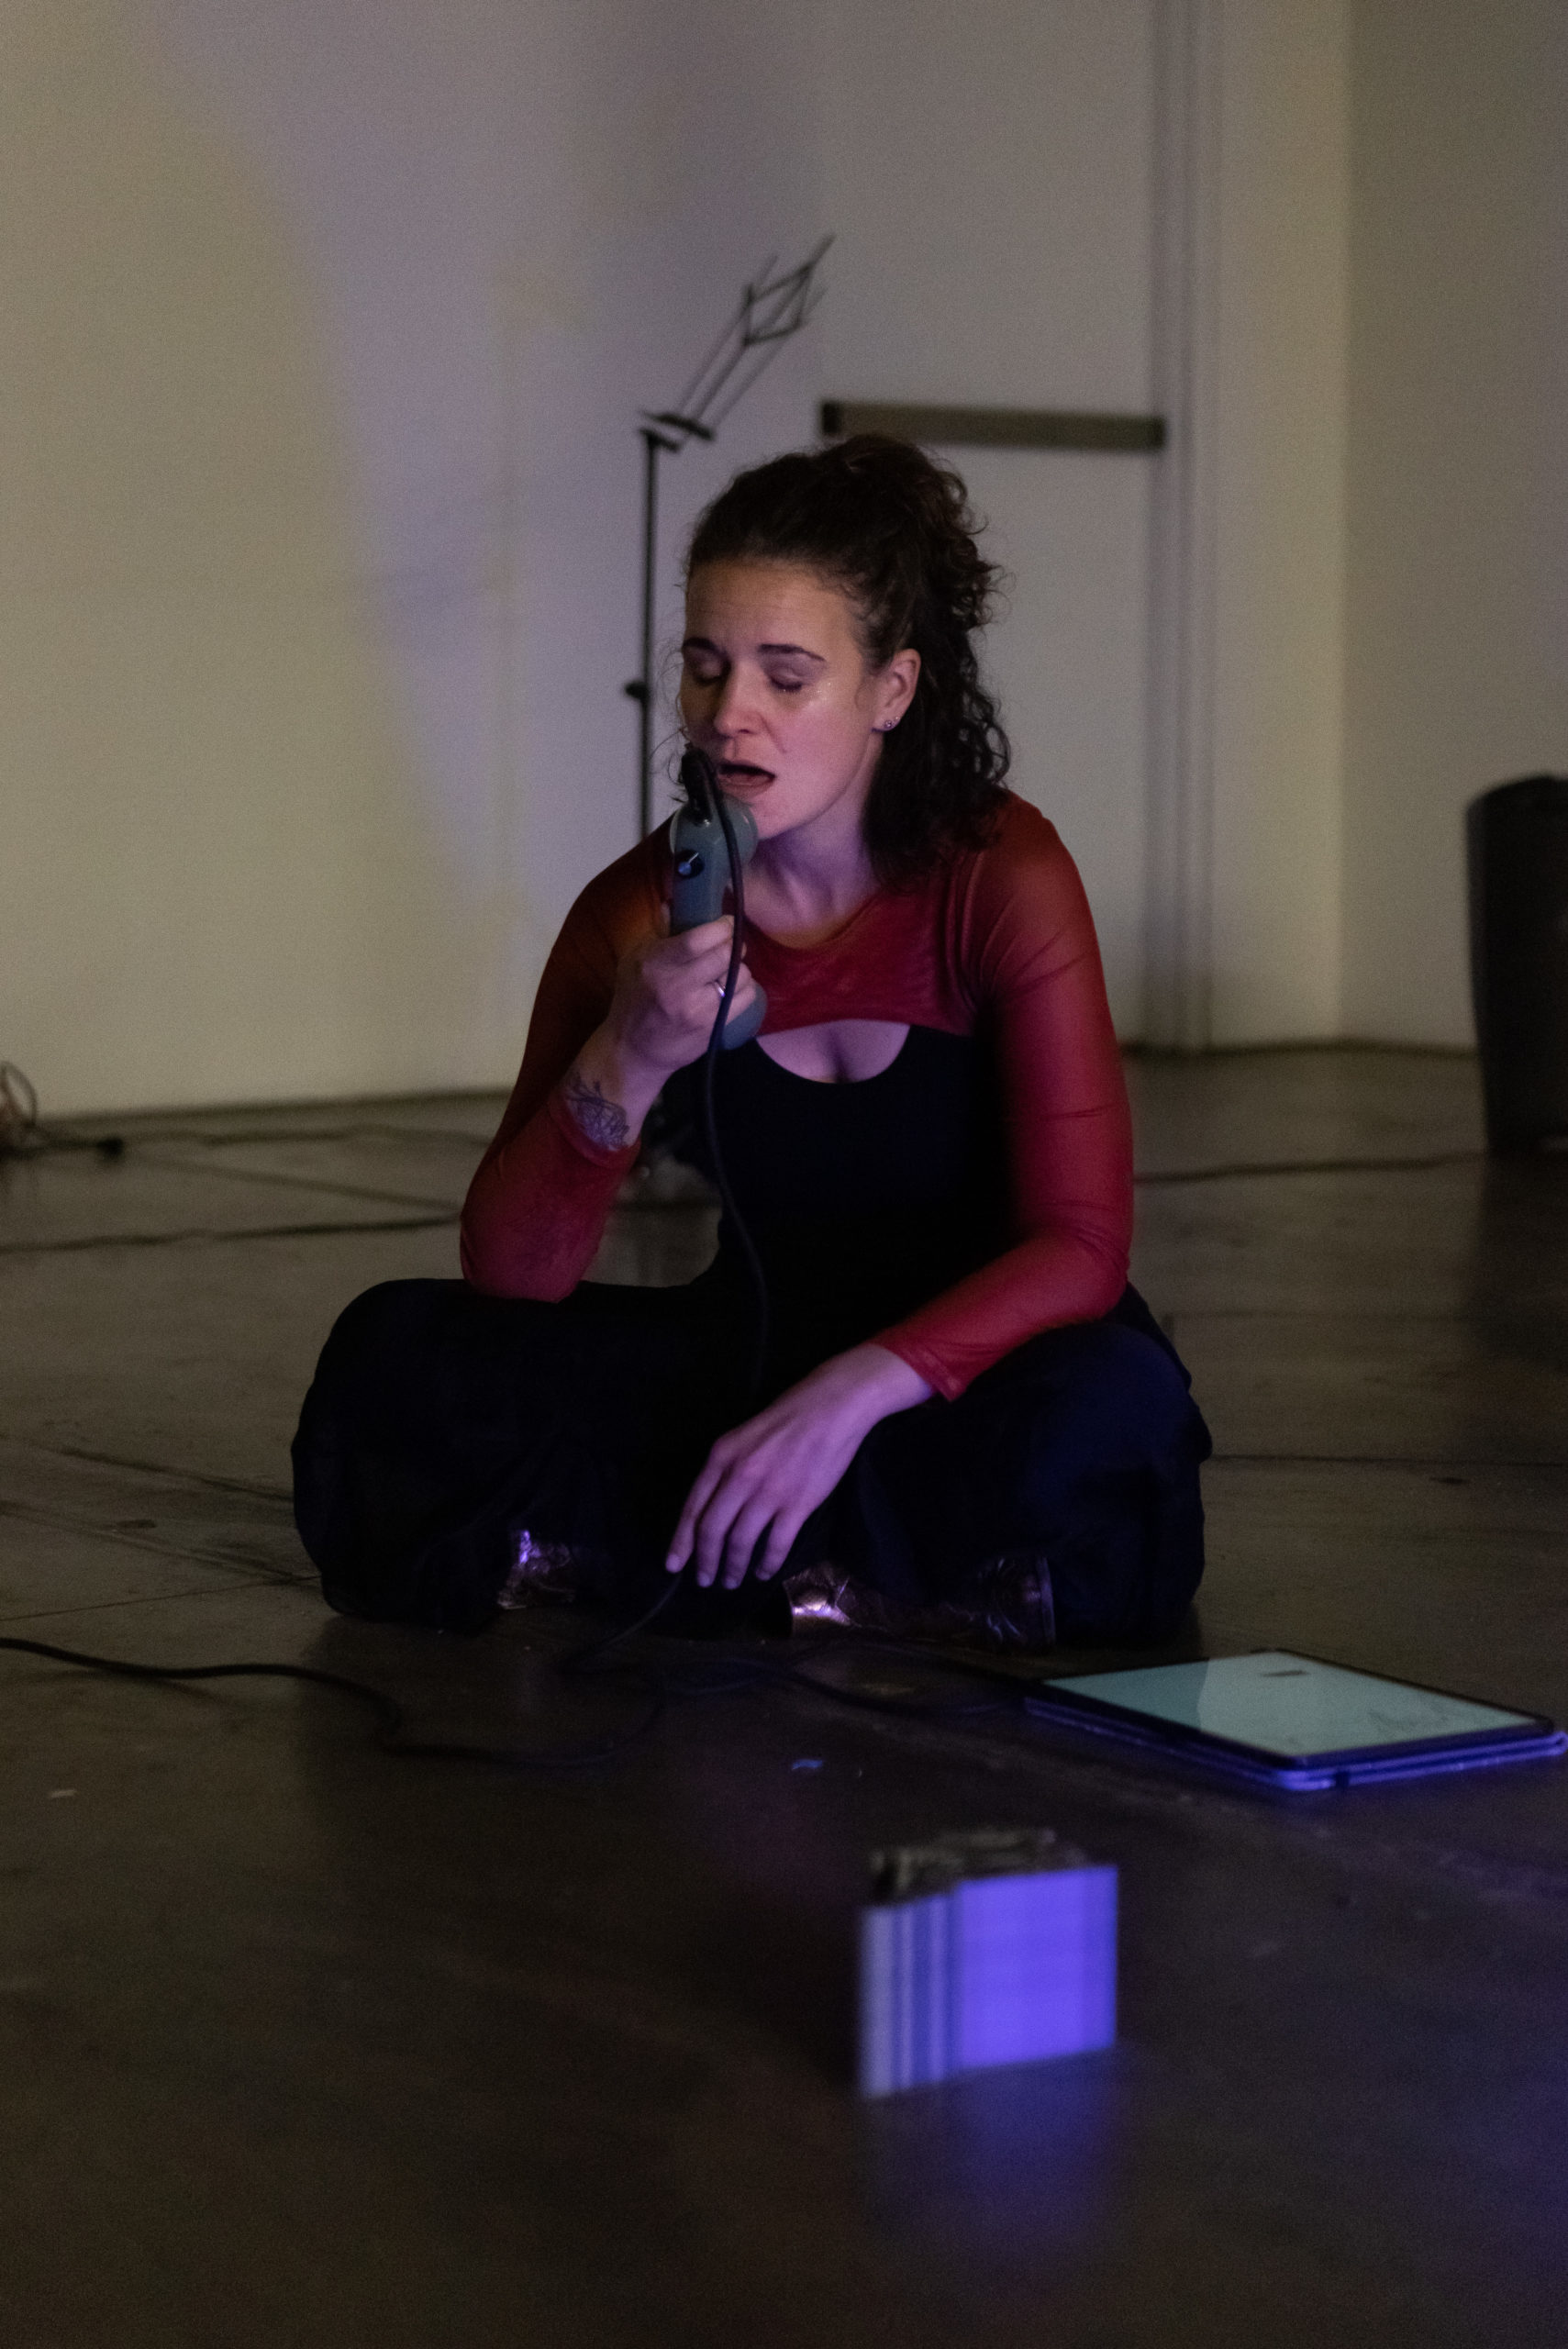 A woman sits on the ground speaking into a telephone receiver in a dimly lit room